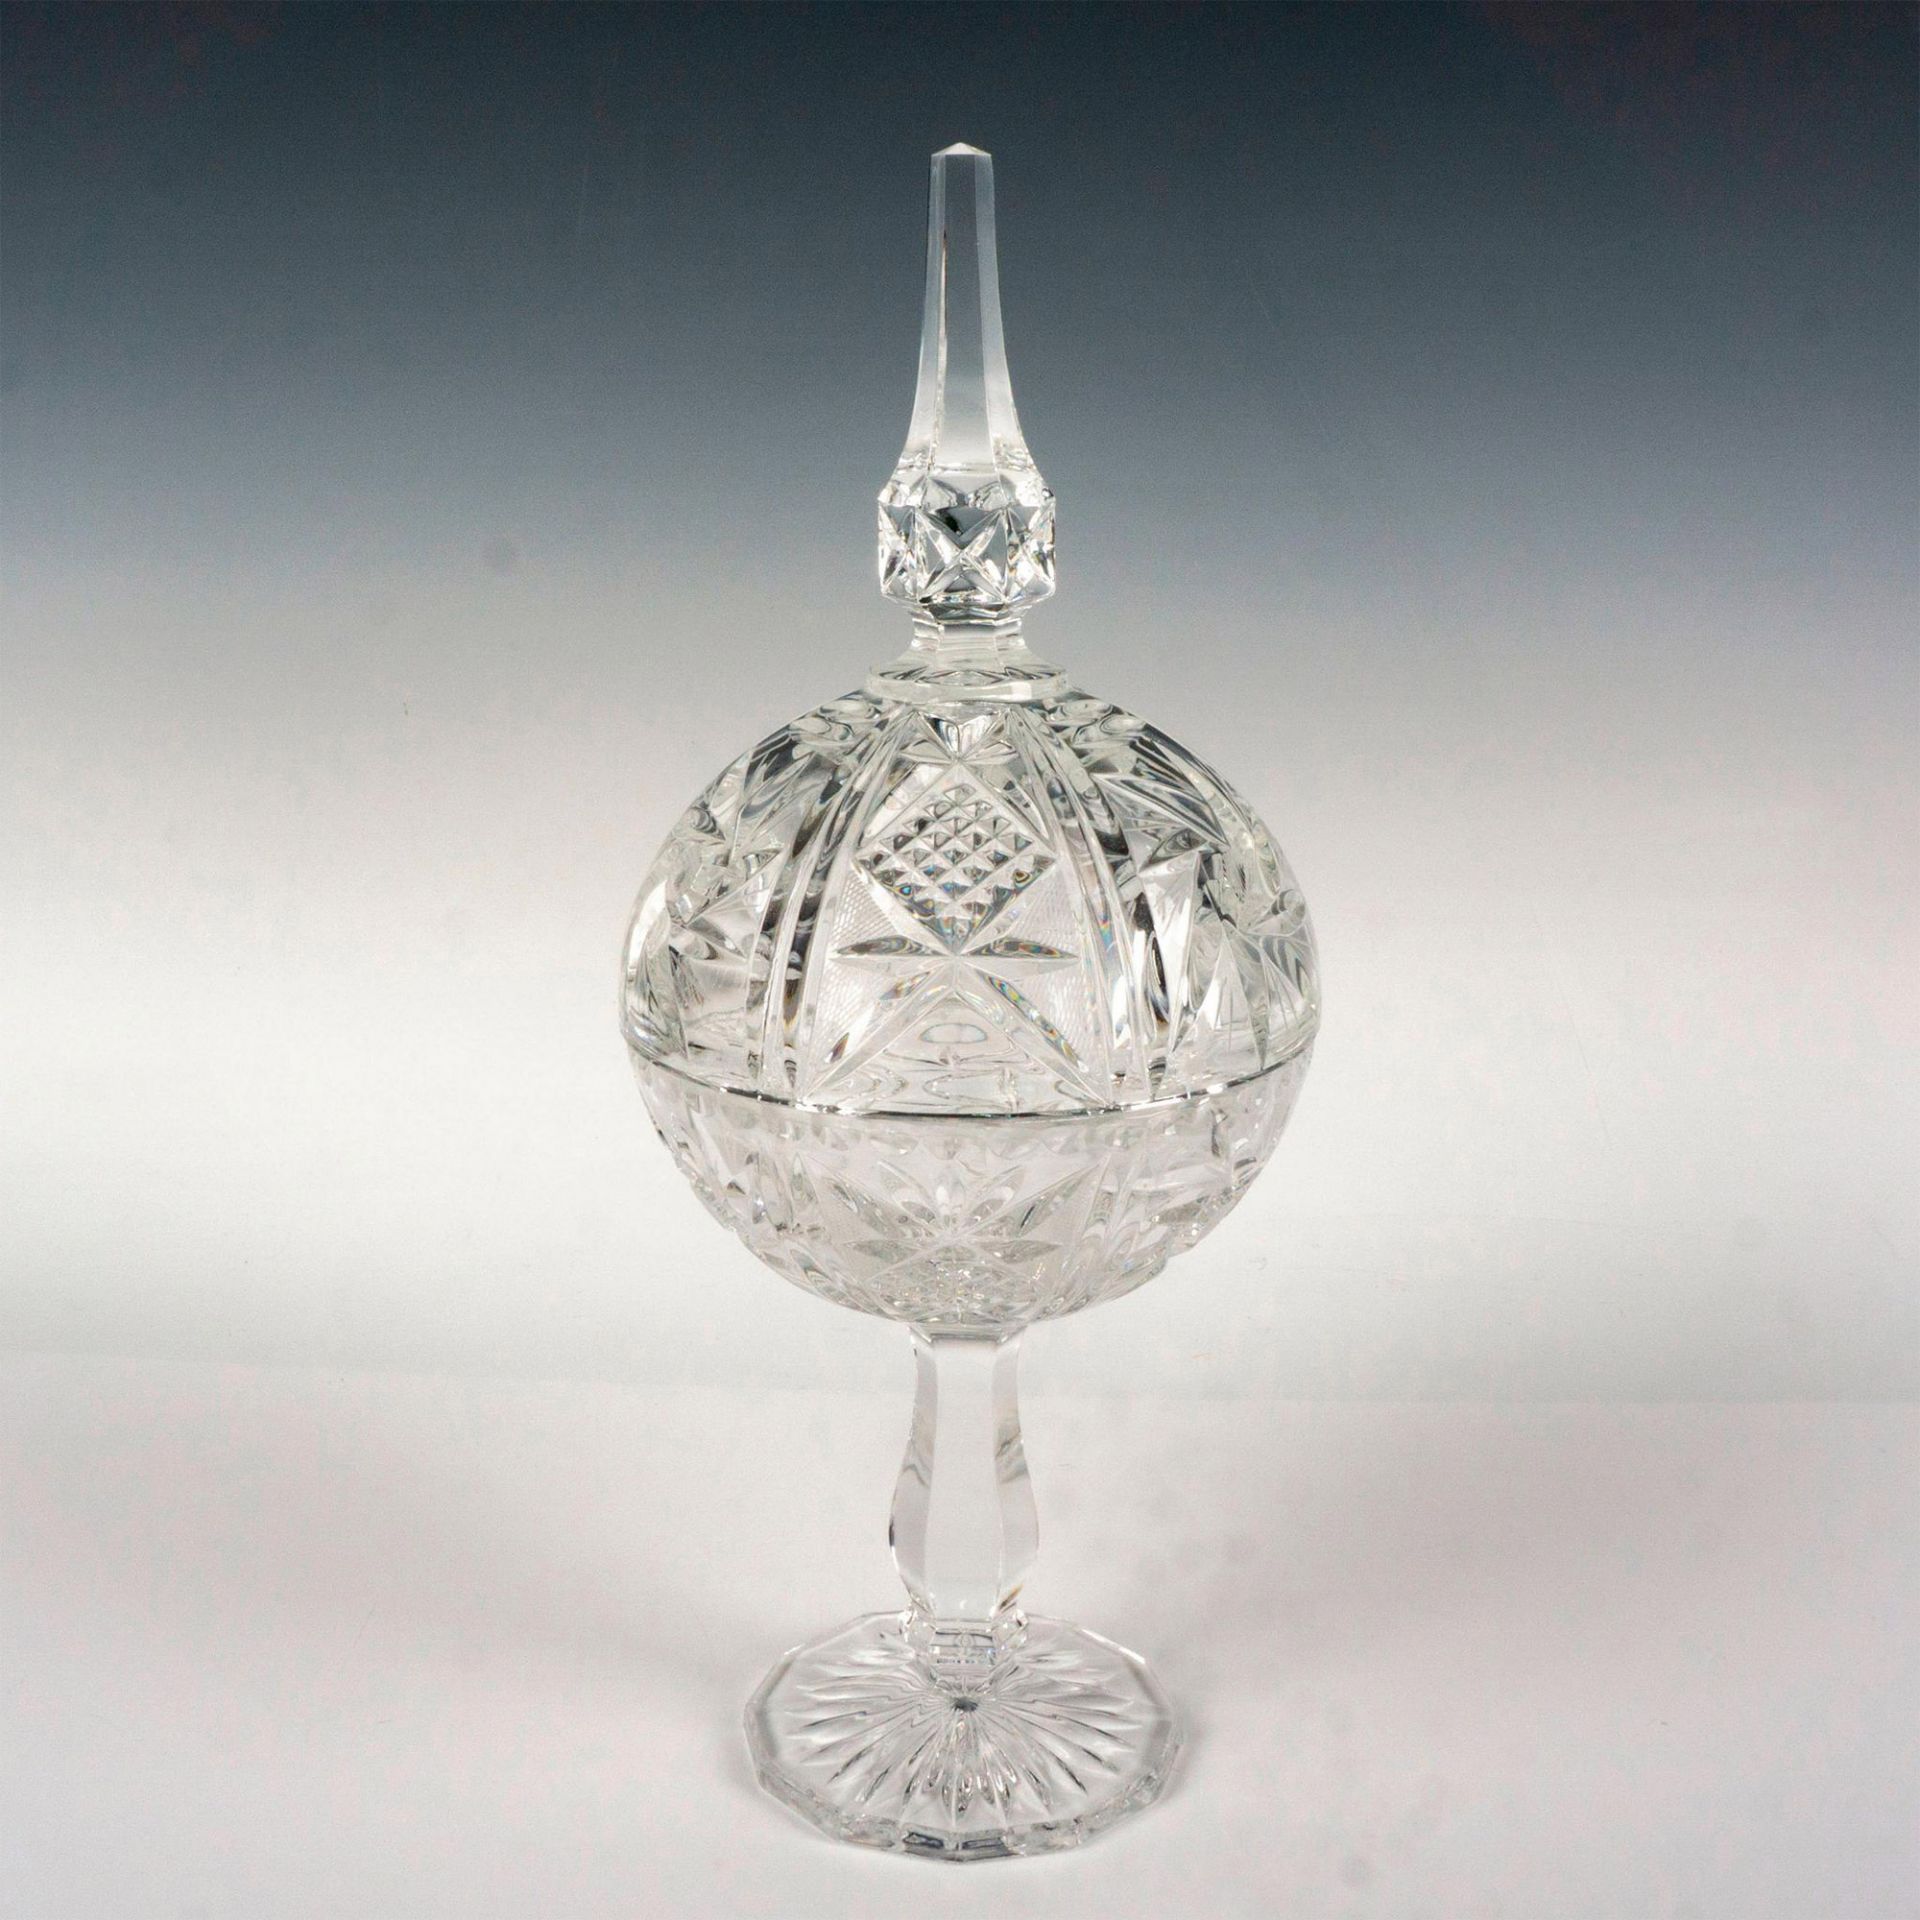 Vintage Crystal Covered Candy Dish - Image 2 of 3